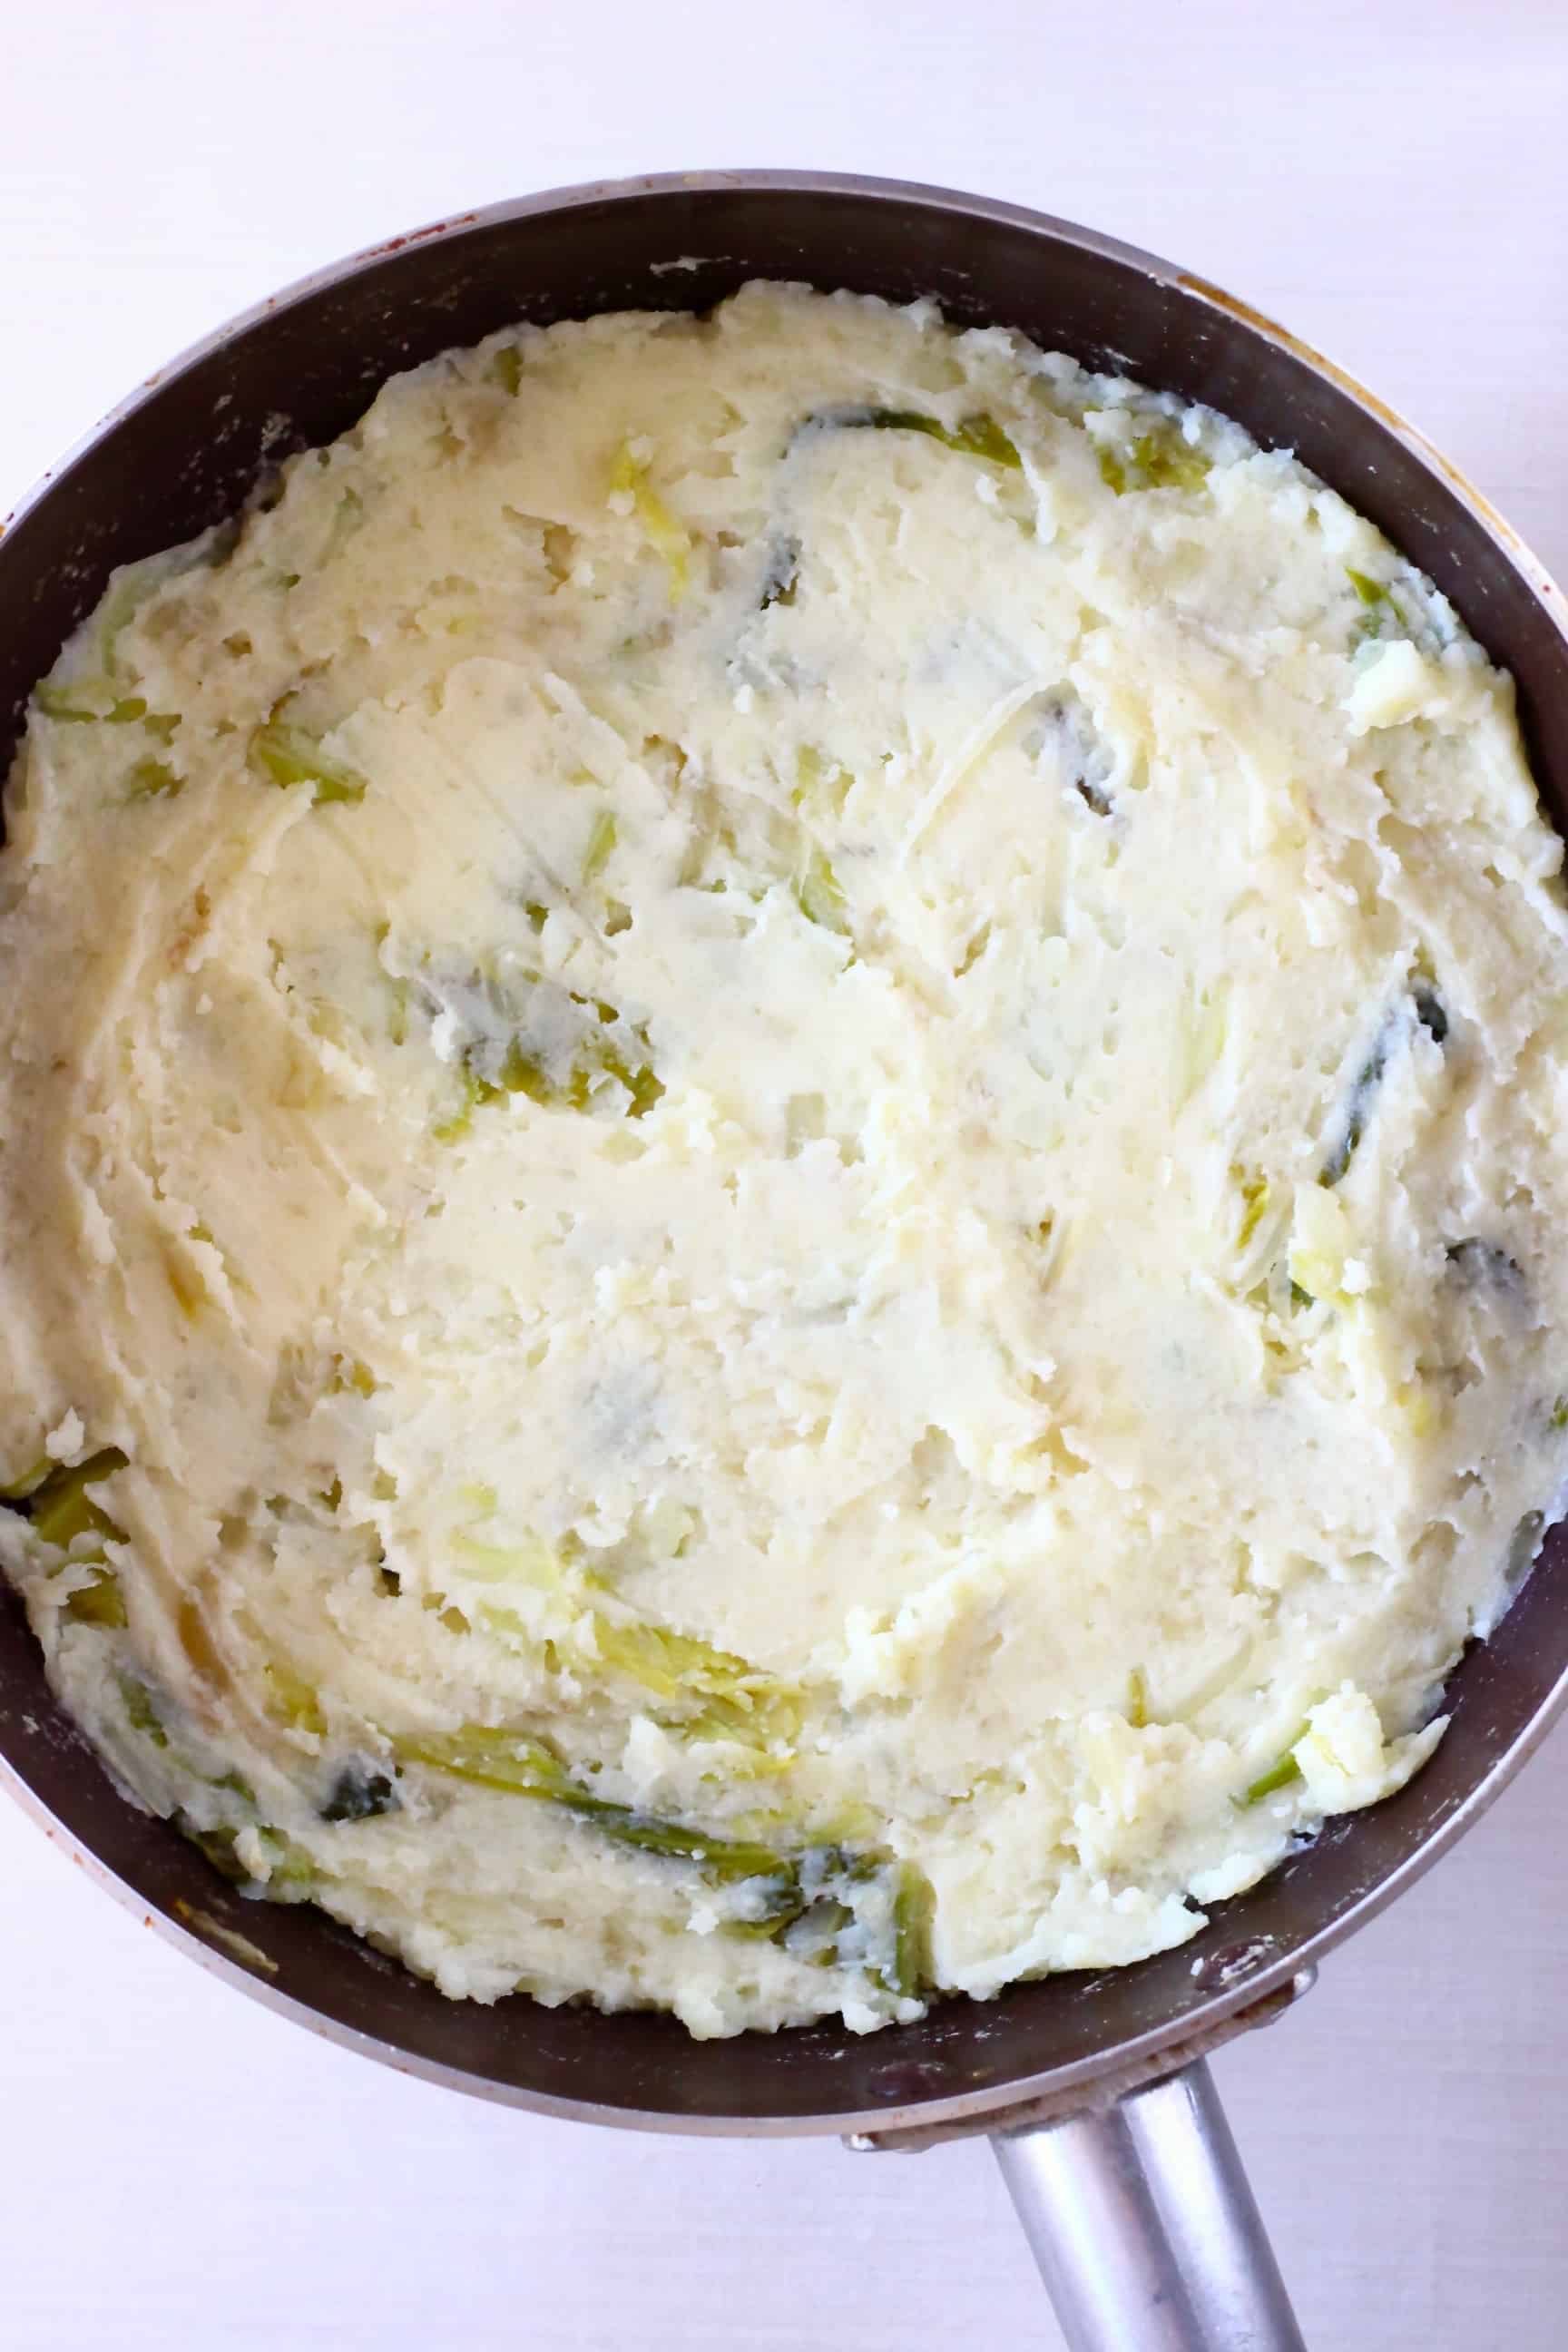 A raw bubble and squeak cake made with mashed potatoes and vegetables in a frying pan 